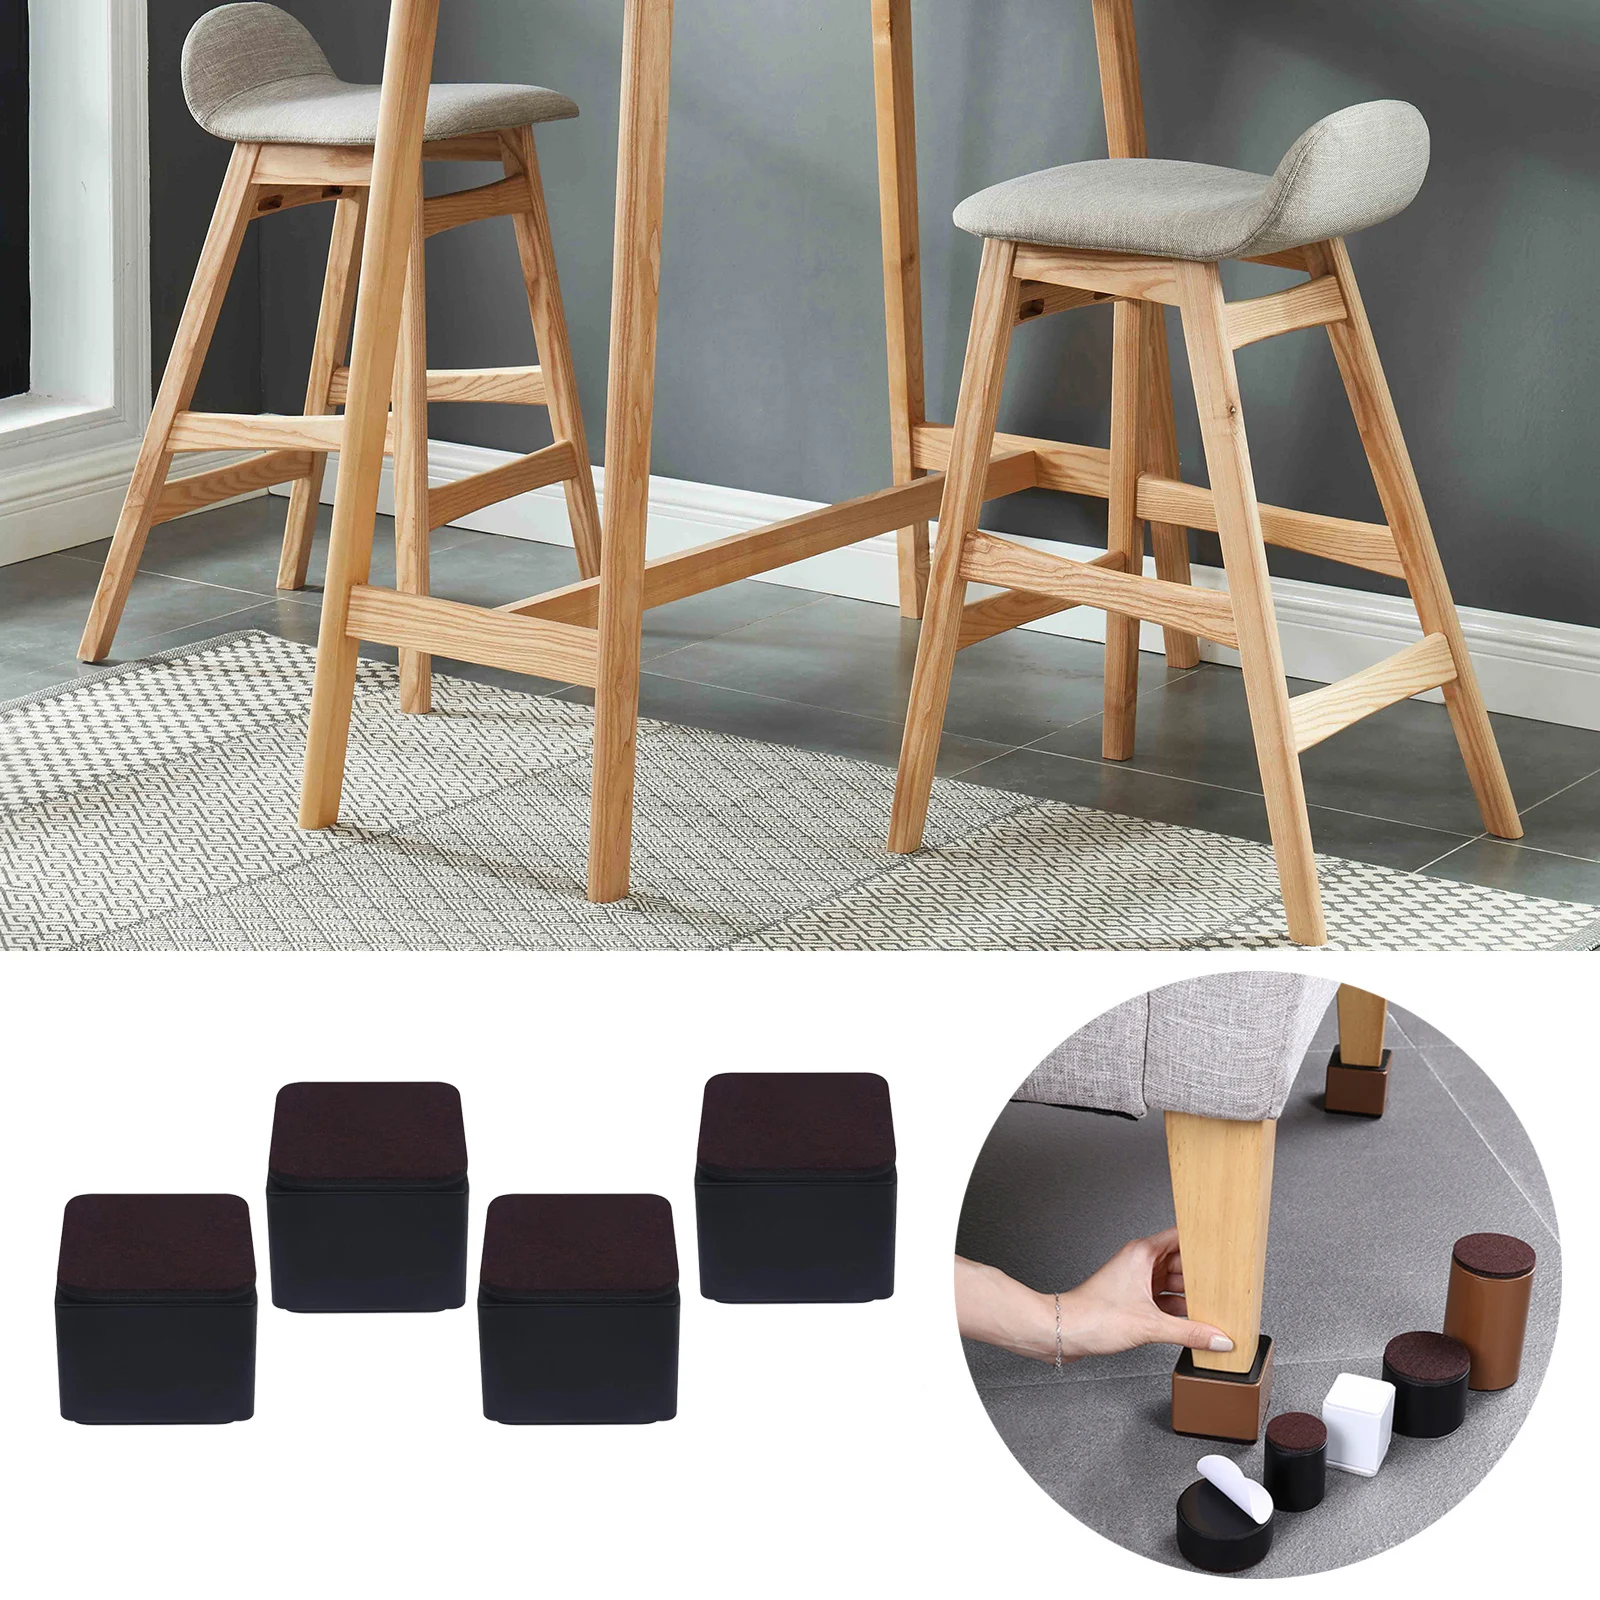 4 Pieces Bed Risers Solid Desk Sofa Feet Protector Anti Slip under Bed Storage for Bedroom Living Room